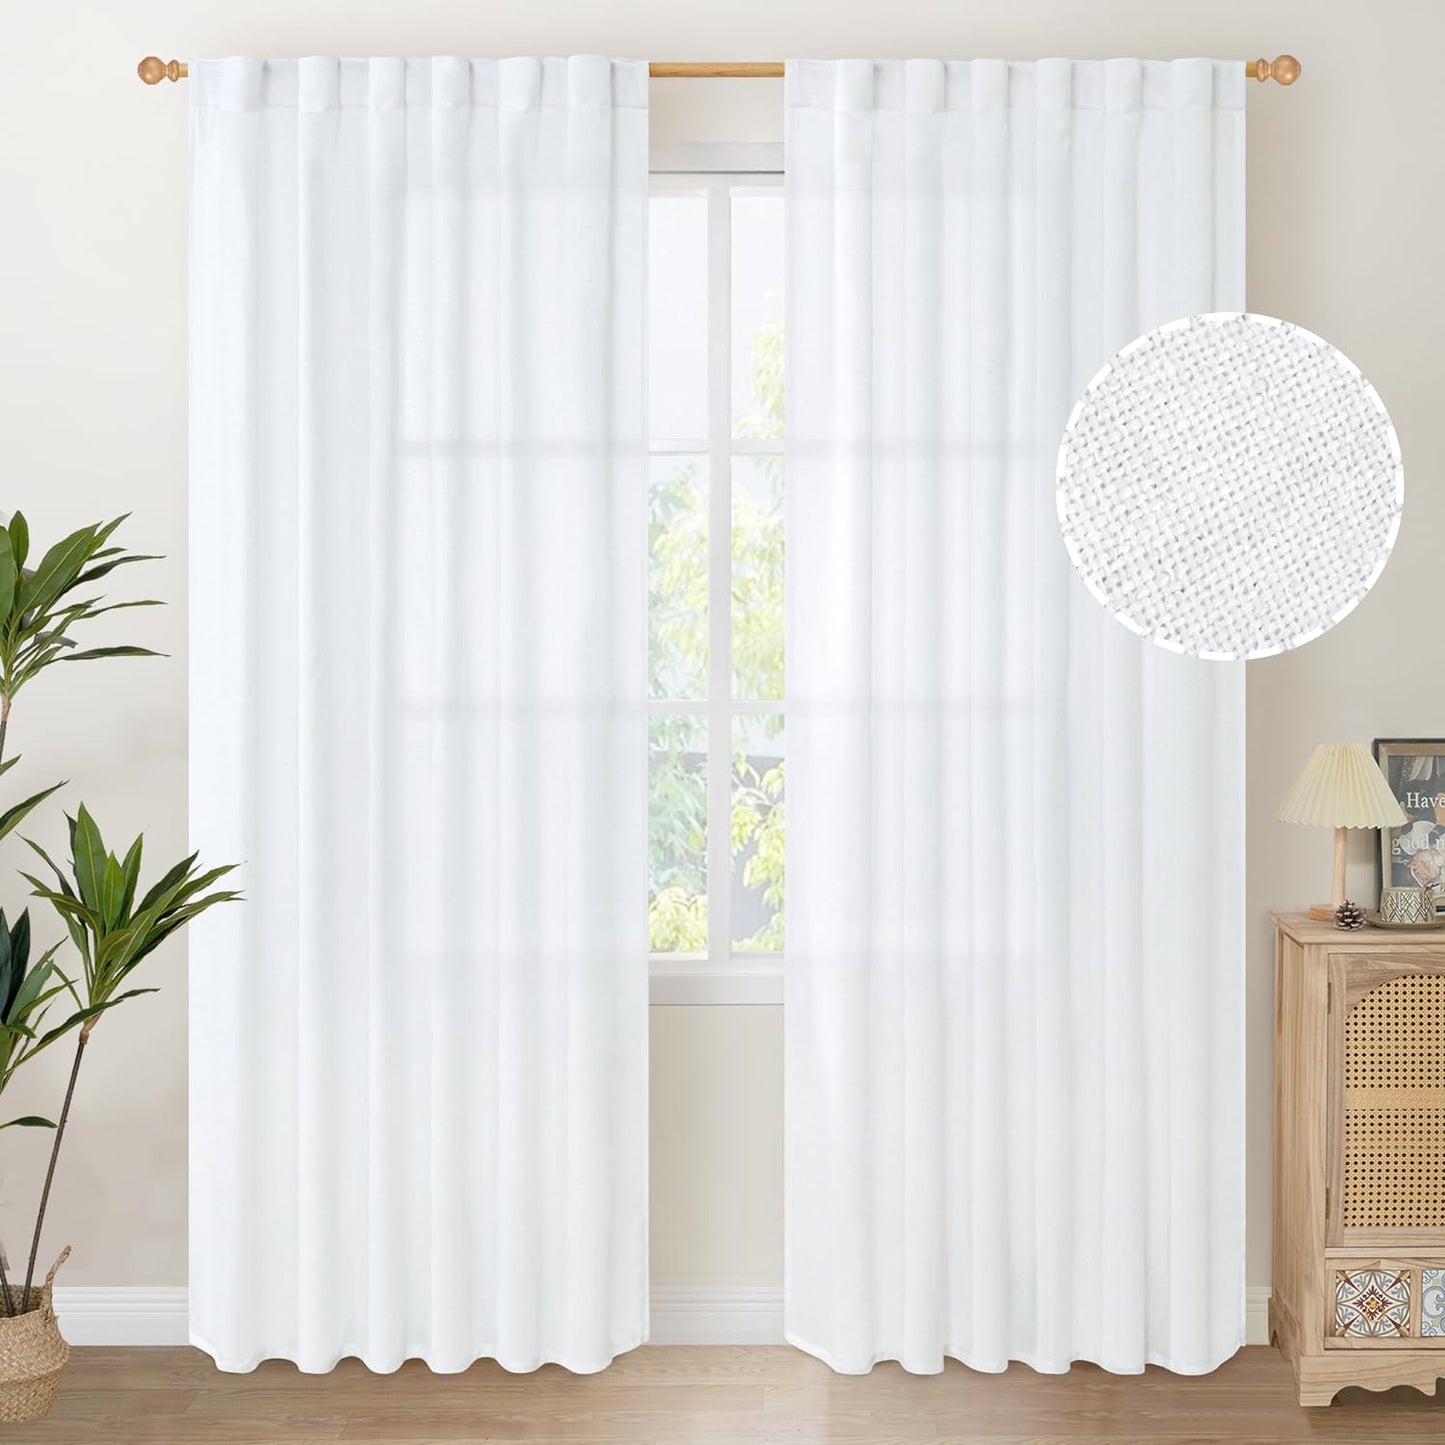 Youngstex Natural Linen Curtains 72 Inch Length 2 Panels for Living Room Light Filtering Textured Window Drapes for Bedroom Dining Office Back Tab Rod Pocket, 52 X 72 Inch  YoungsTex White 52W X 84L 